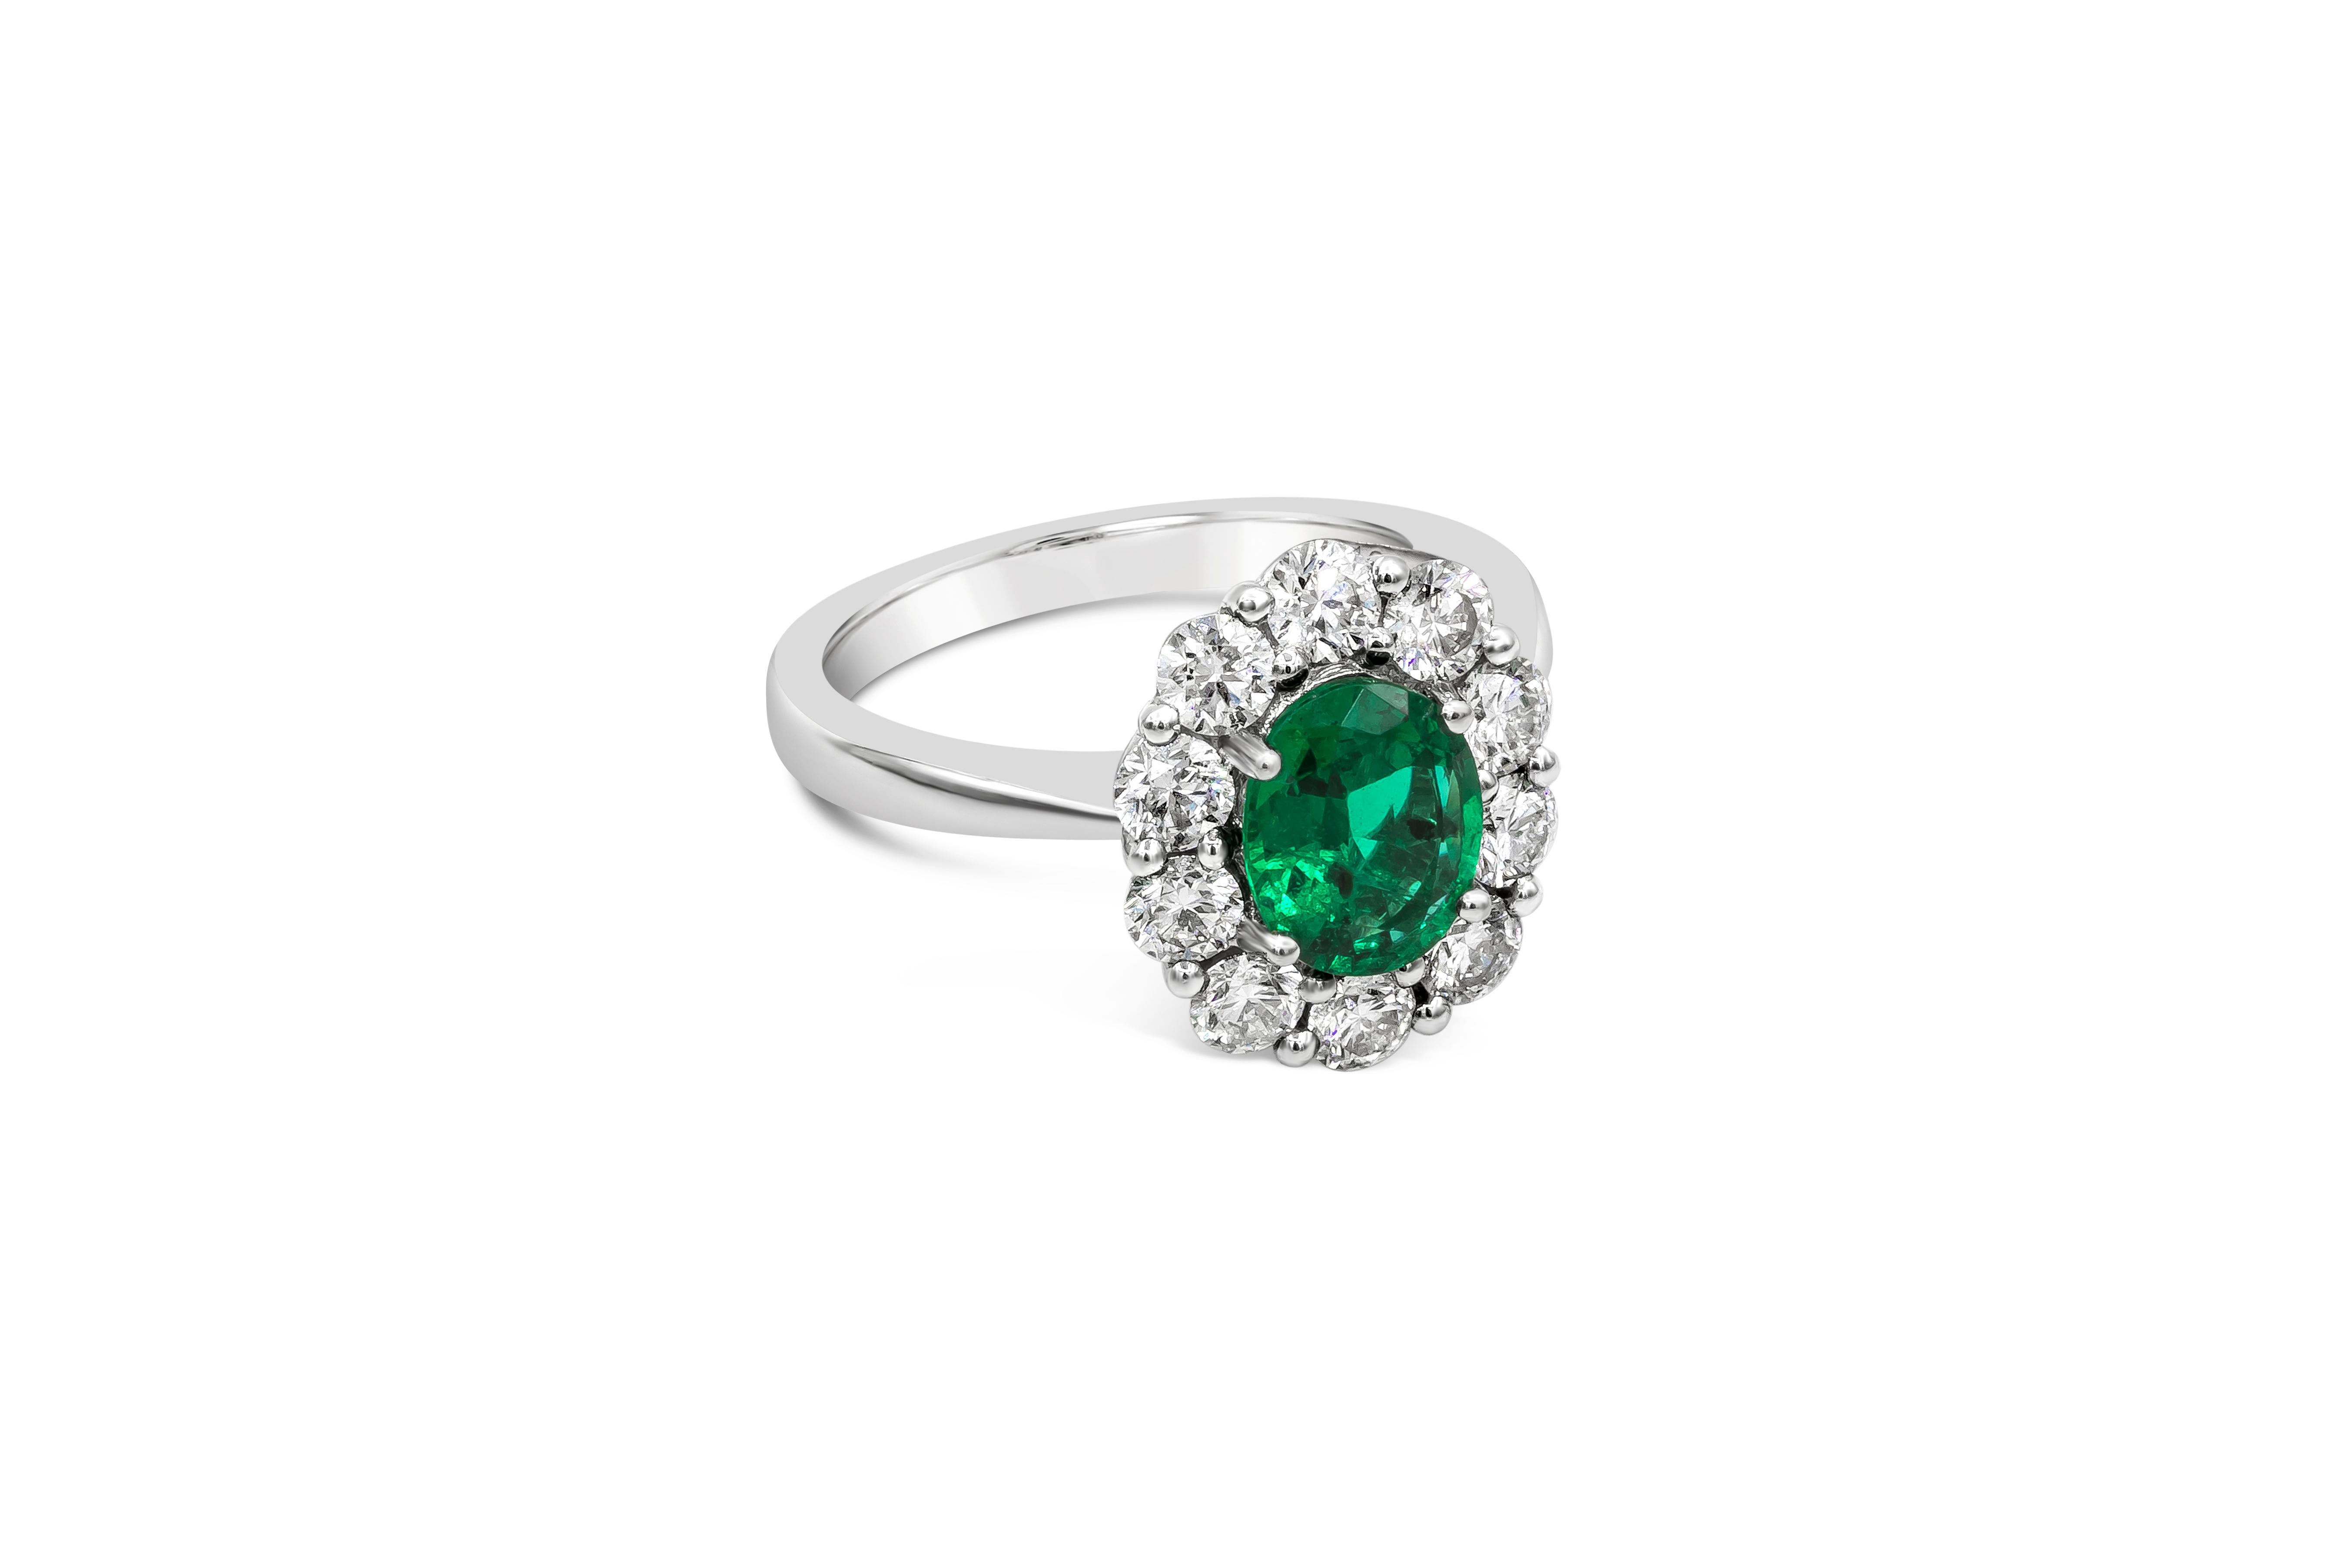 A beautiful engagement ring showcasing a 1.12 carat oval cut color-rich green emerald, surrounded by a single row of brilliant round diamonds weighing 1.09 carat total, set in an elegant floral-motif design. Made with 18K White Gold, Size 6 US